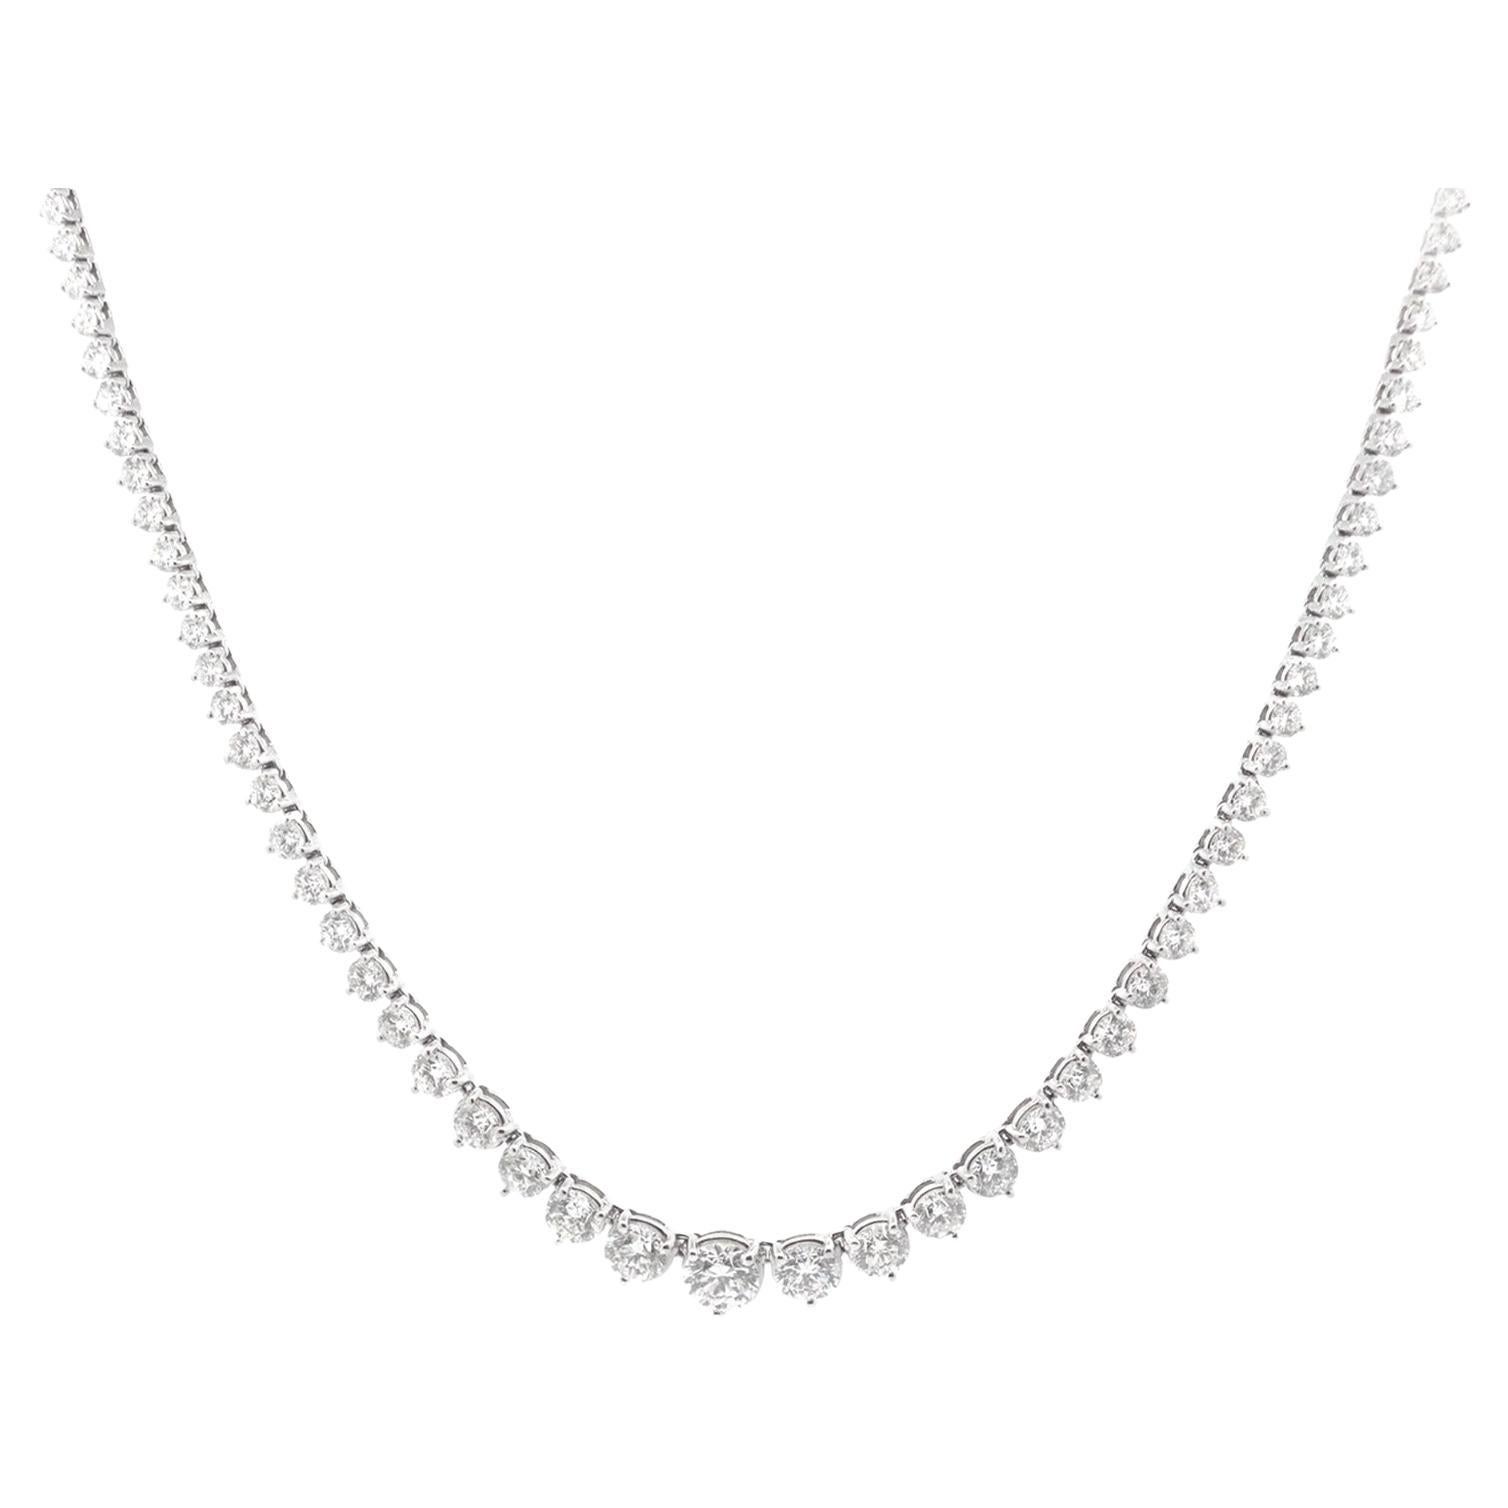 20.38ct Diamond 18k Gold Graduated Tennis Necklace For Sale